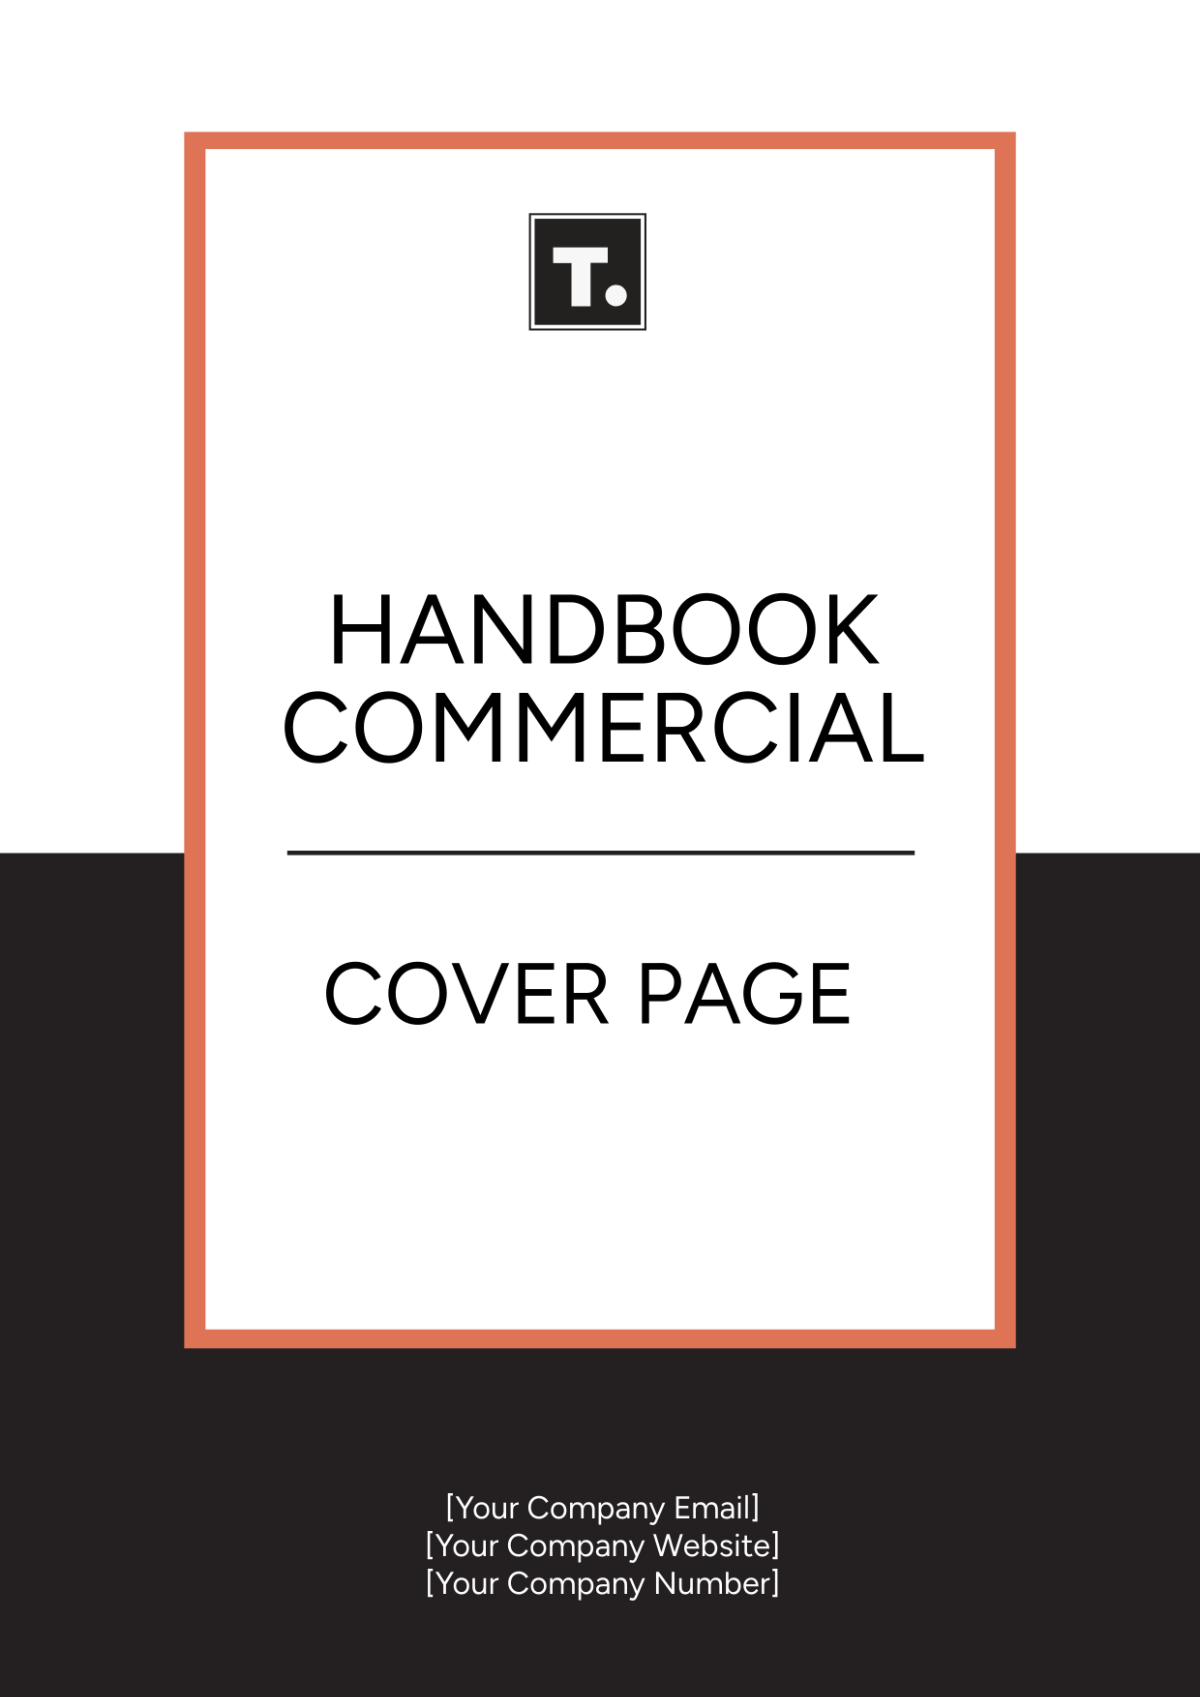 Handbook Commercial Cover Page